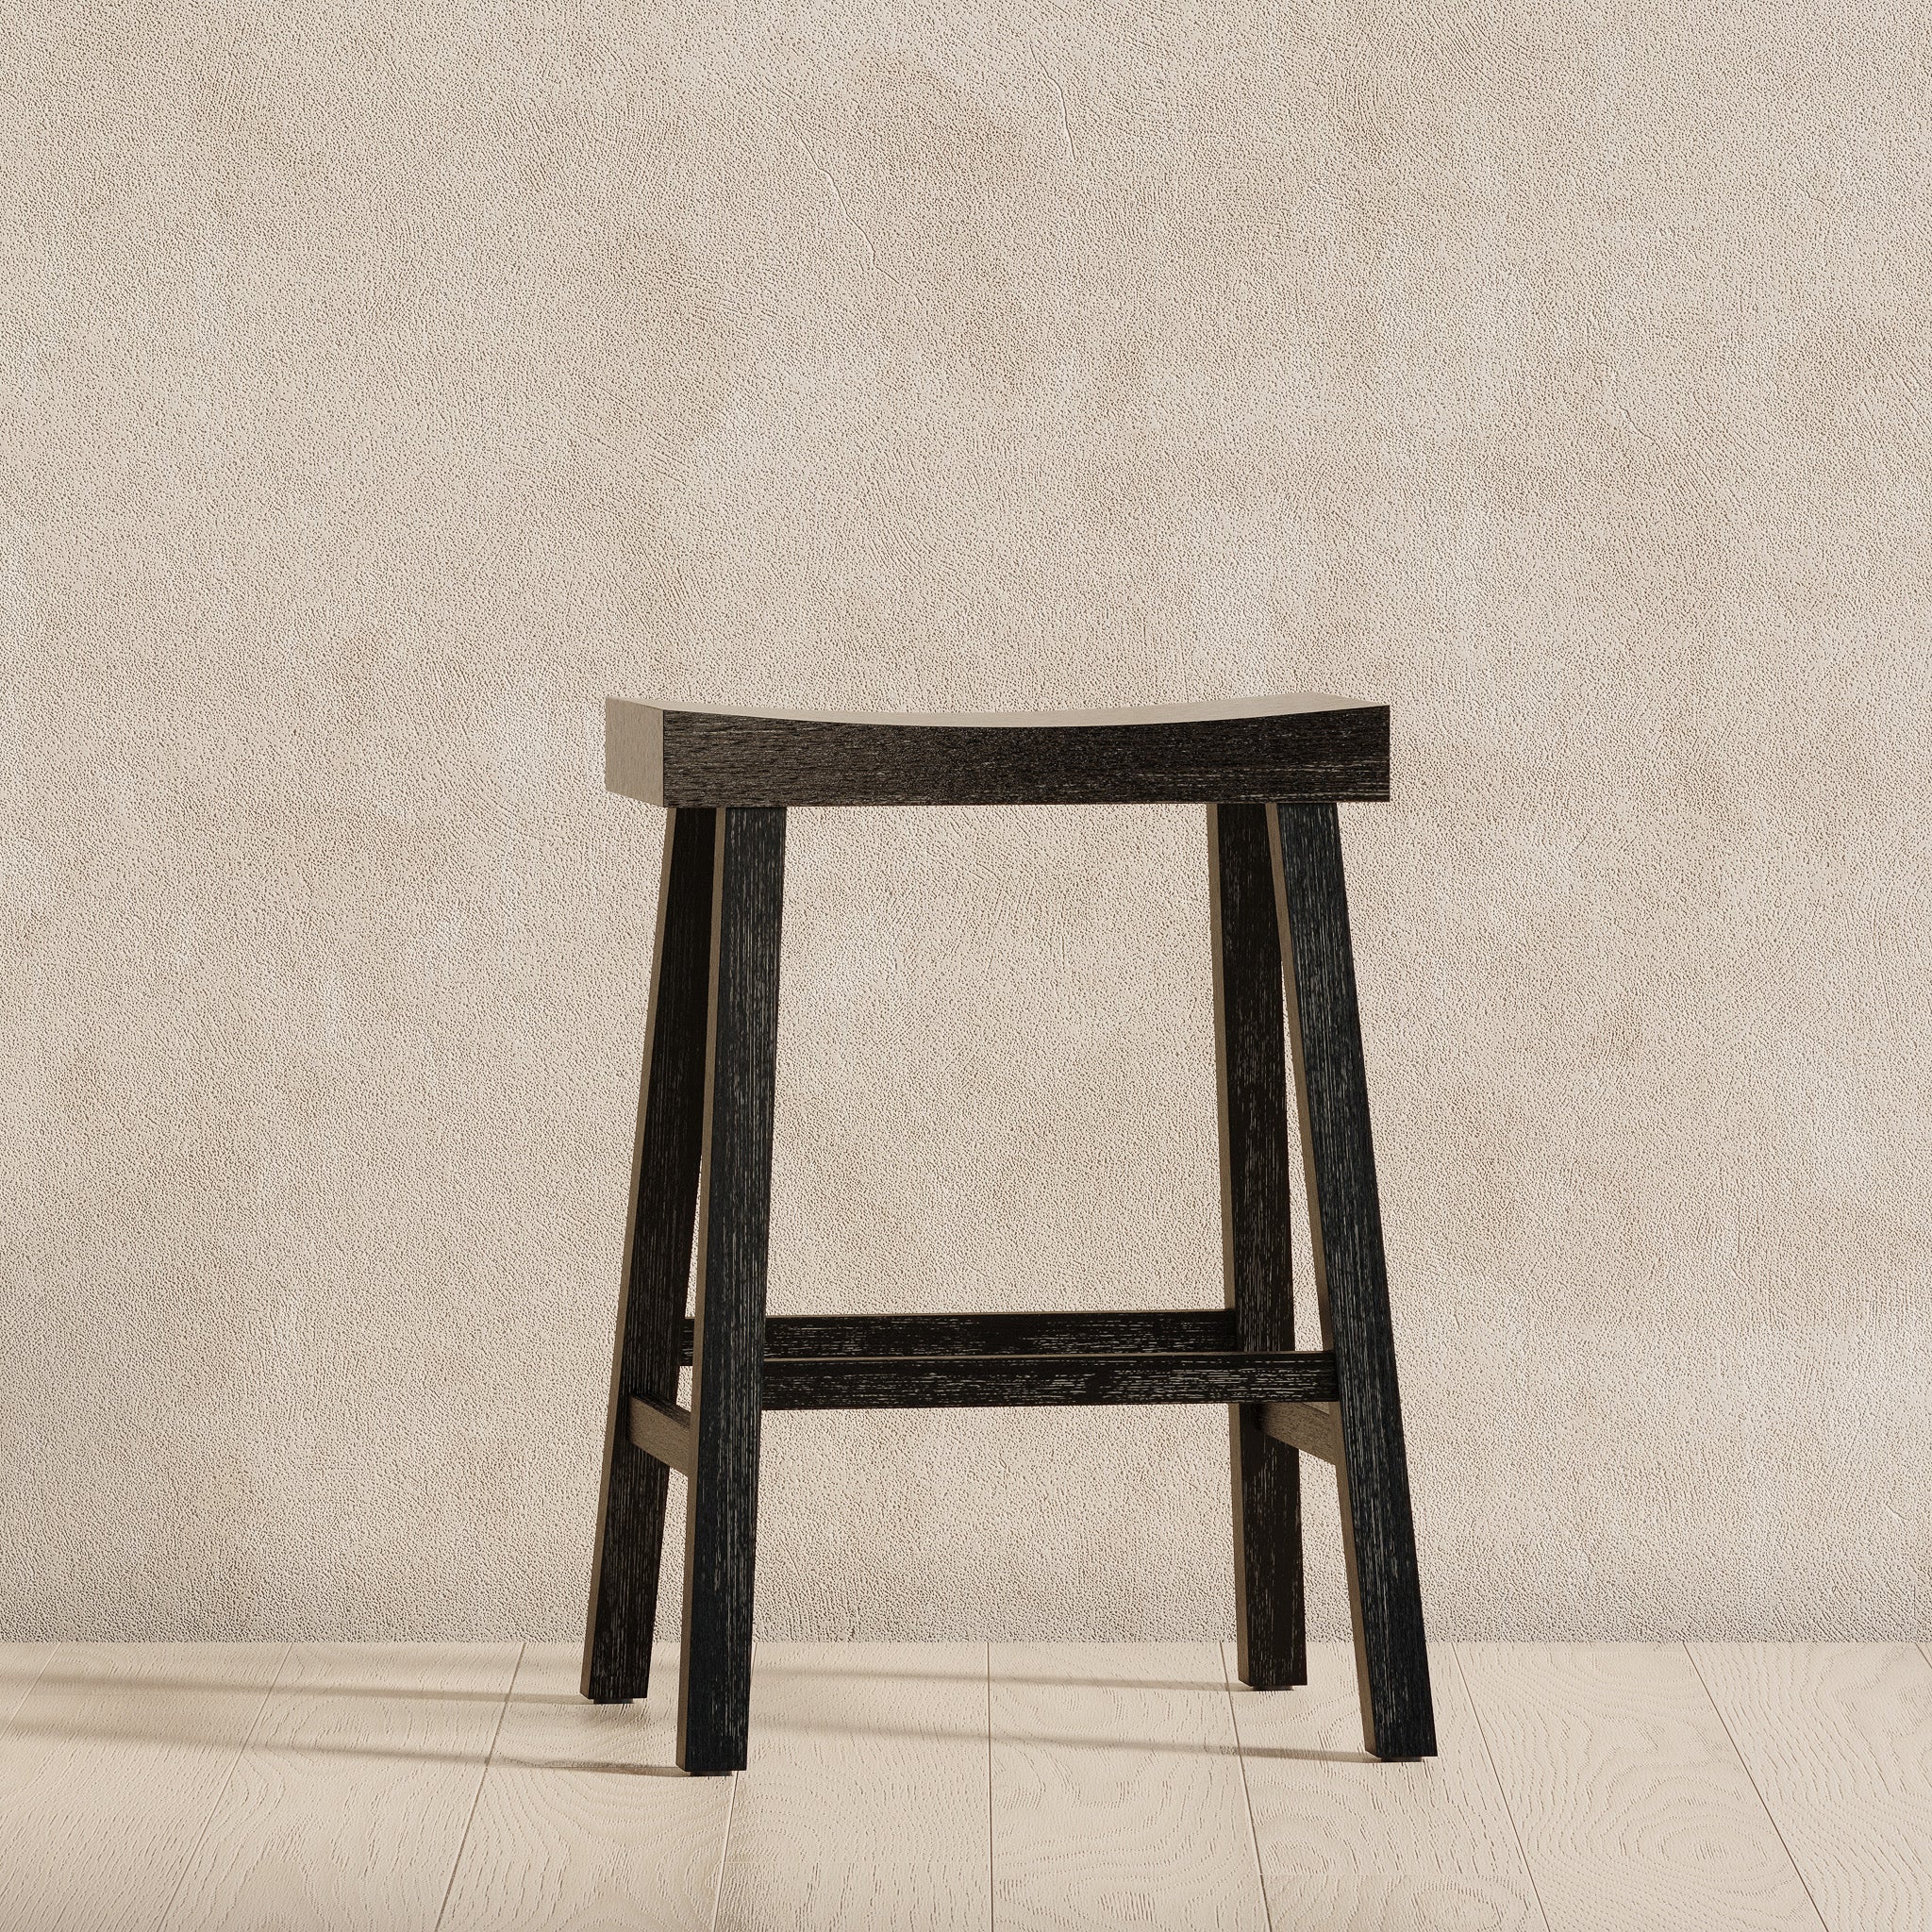 Vincent Counter Stool in Antiqued Black Finish in Stools by Maven Lane